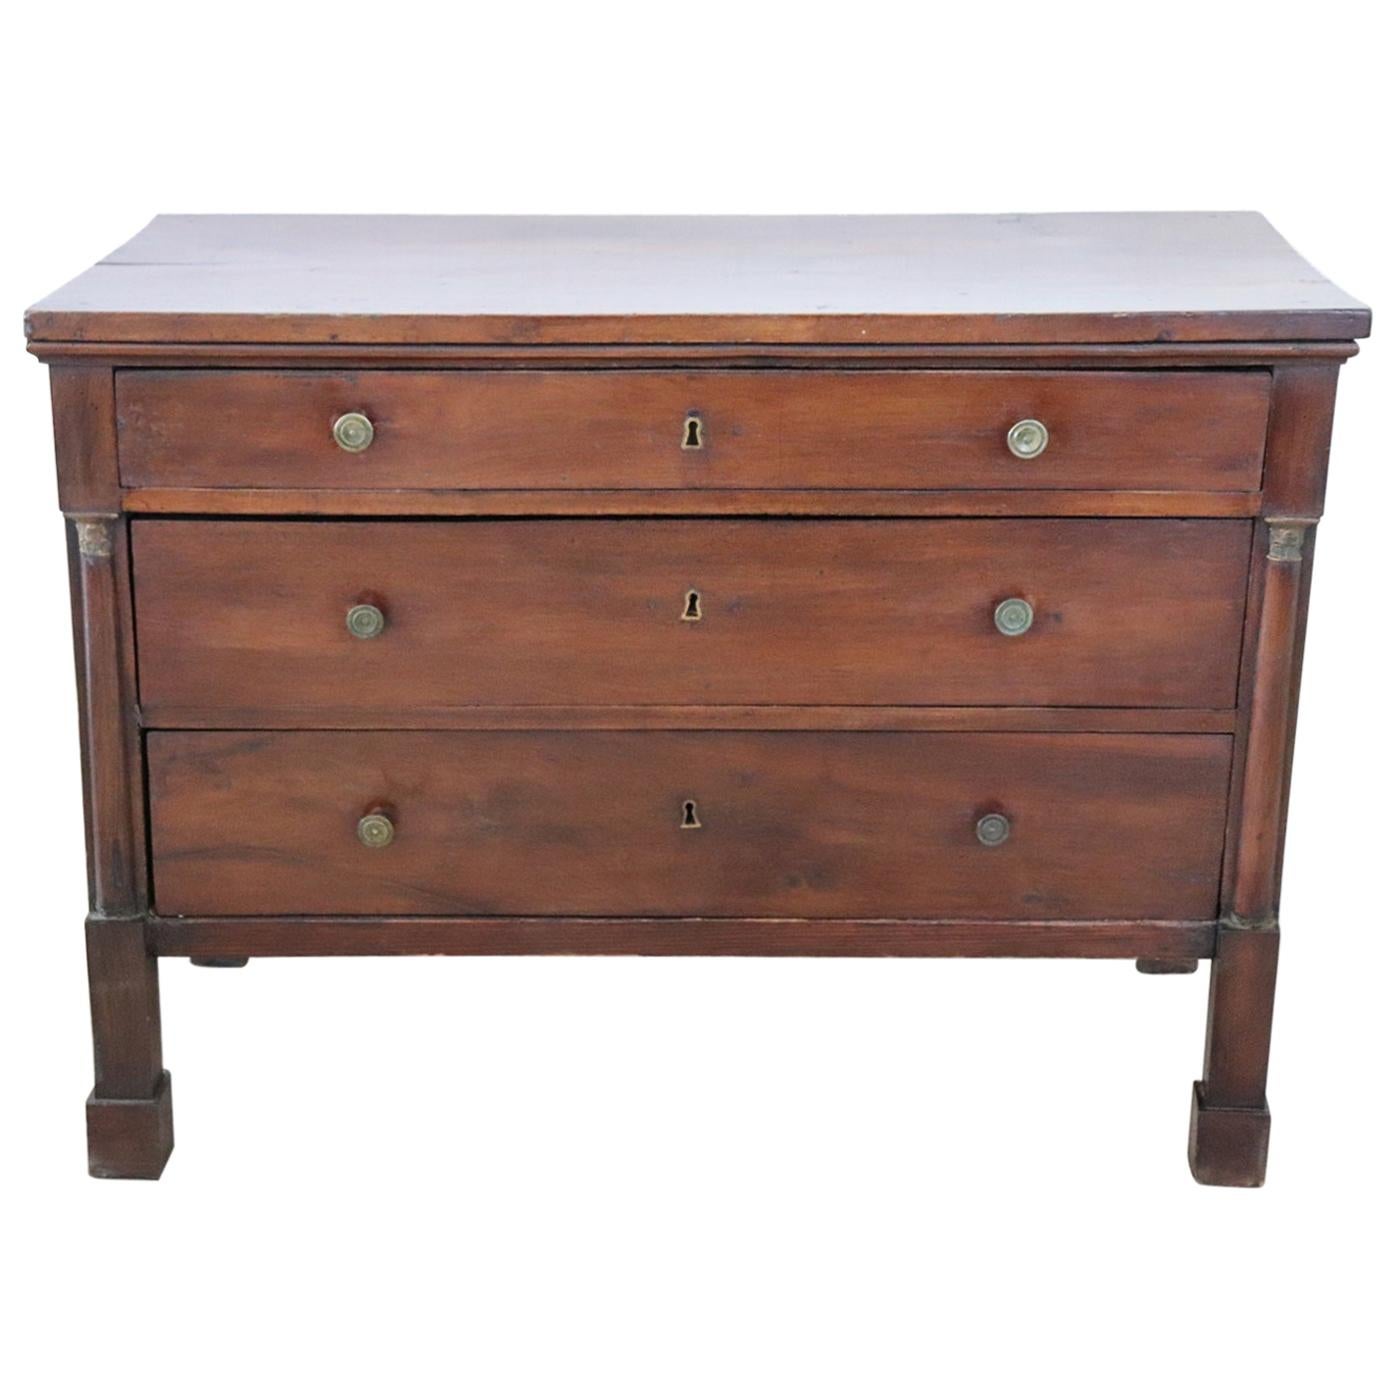 19th Century Empire Walnut Wood Commode or Chest of Drawer